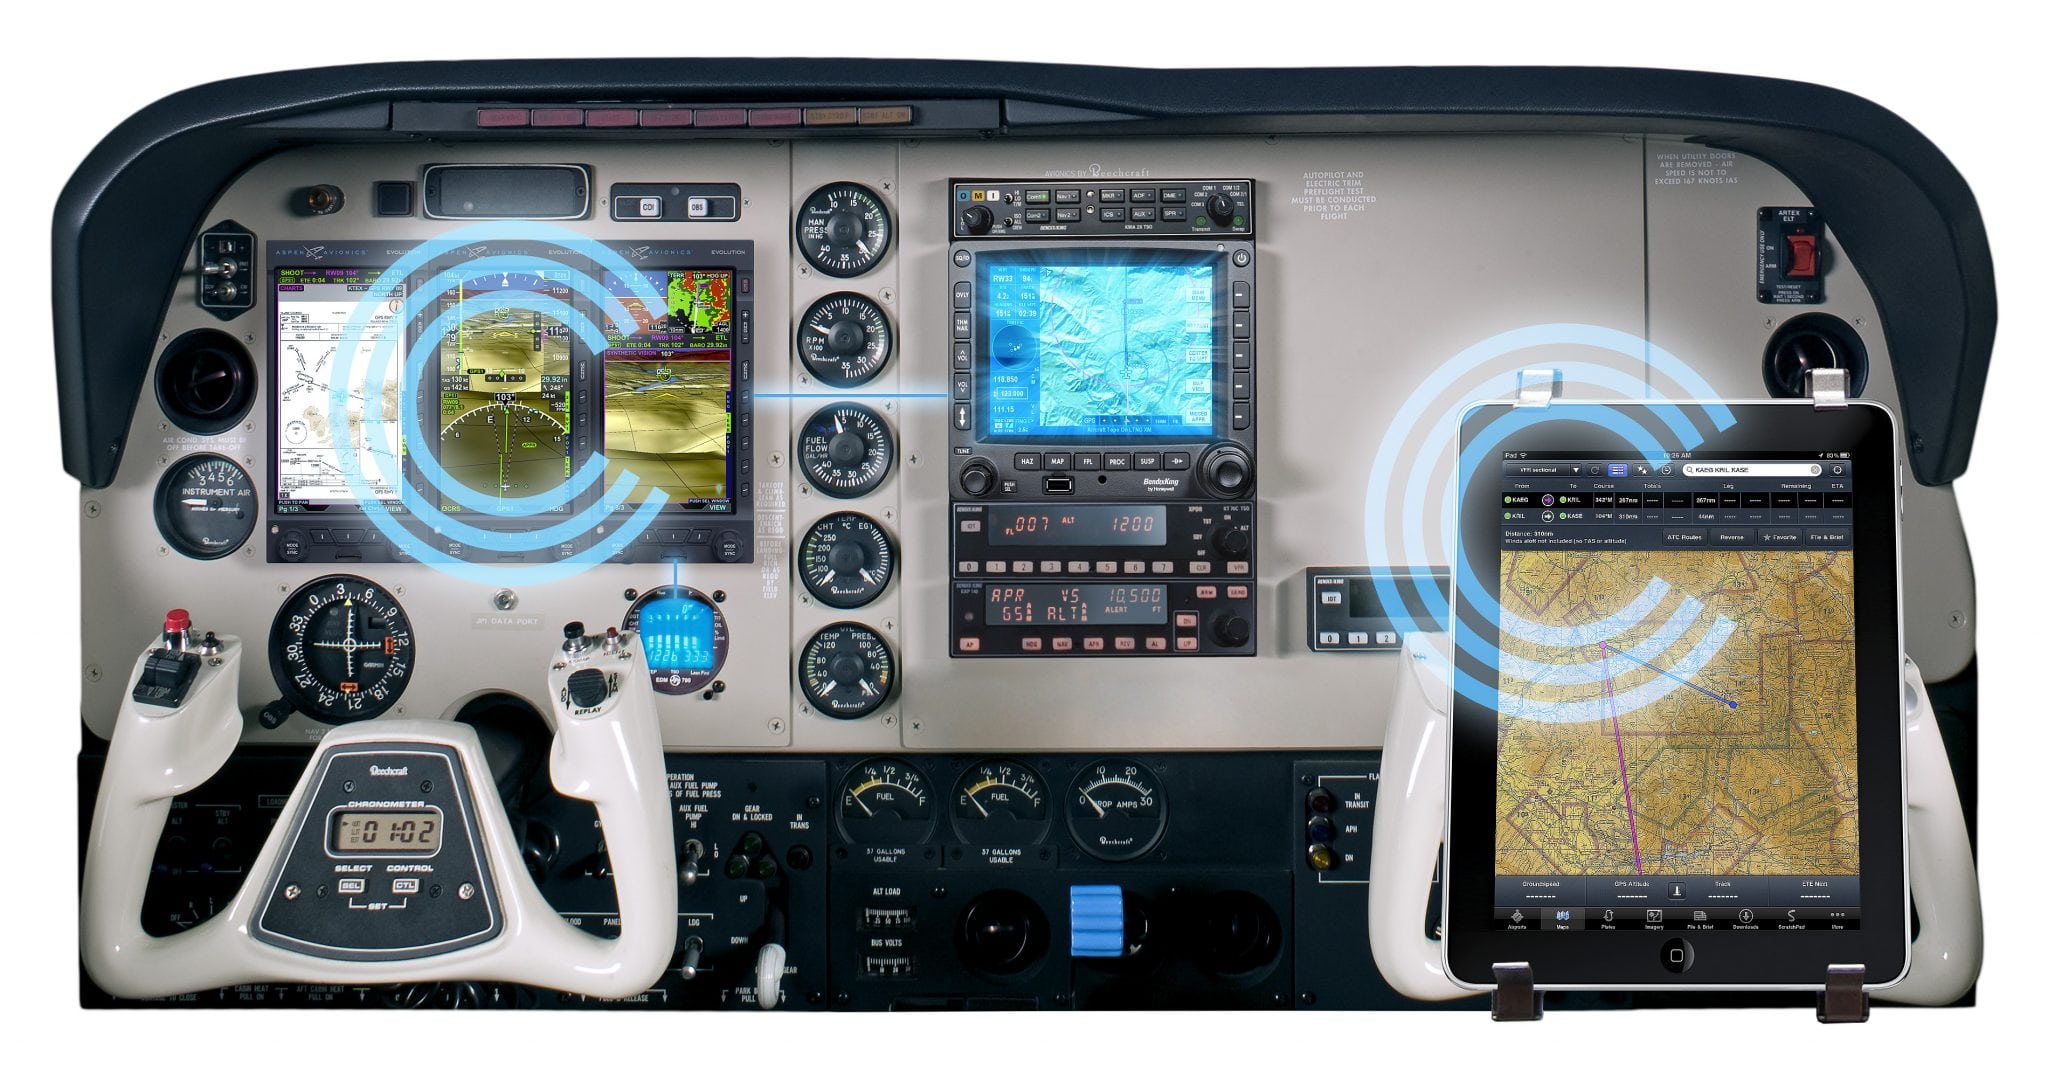 The connected panel from Aspen Avionics